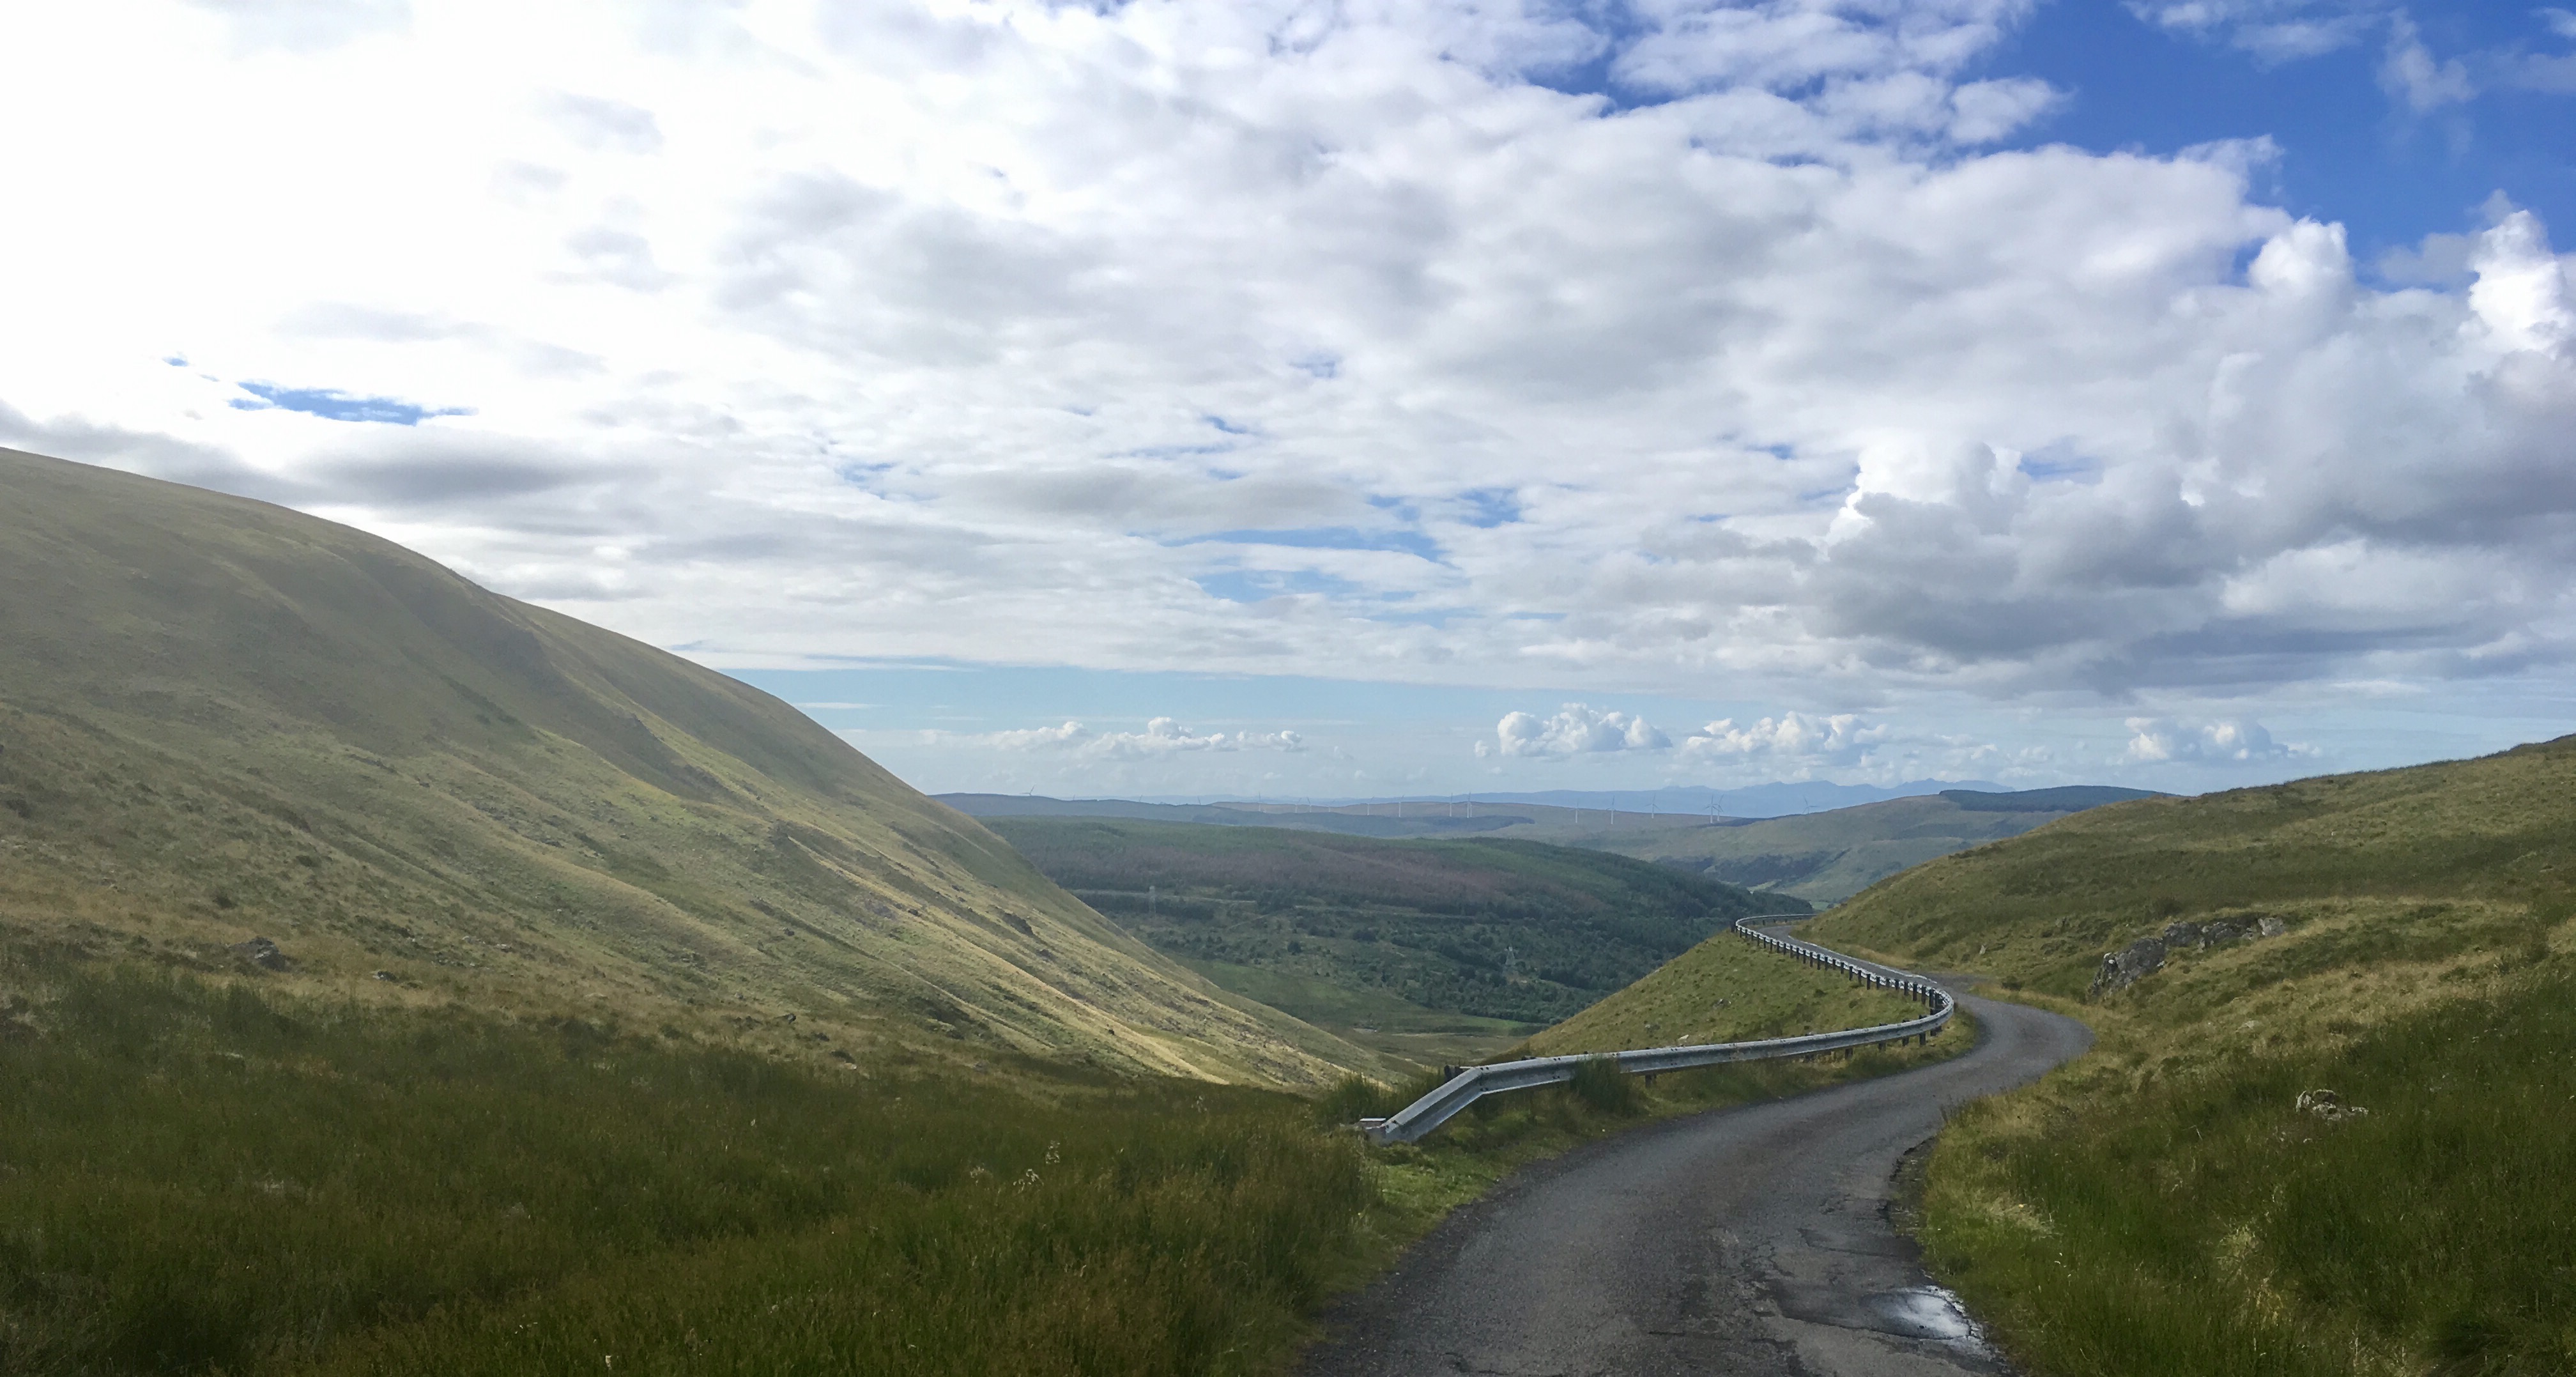 View from the hills above Dailly, during the Southern Uplands Audax 2017